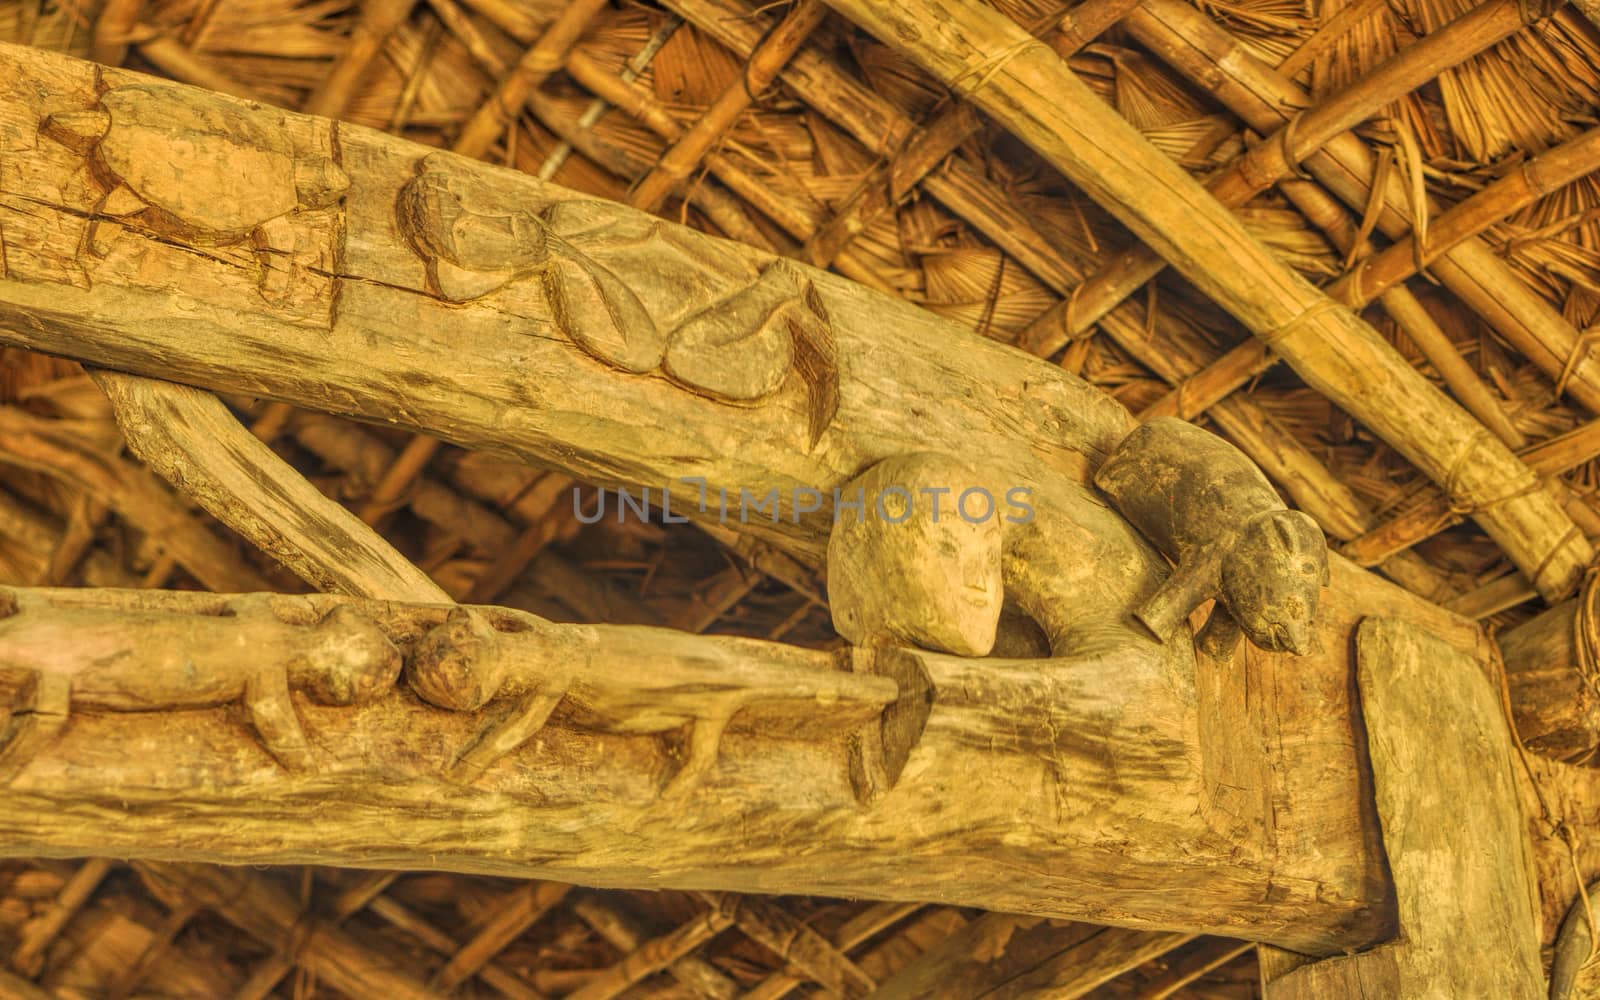 Interior detail of a traditional wooden dwelling with carved symbols in India